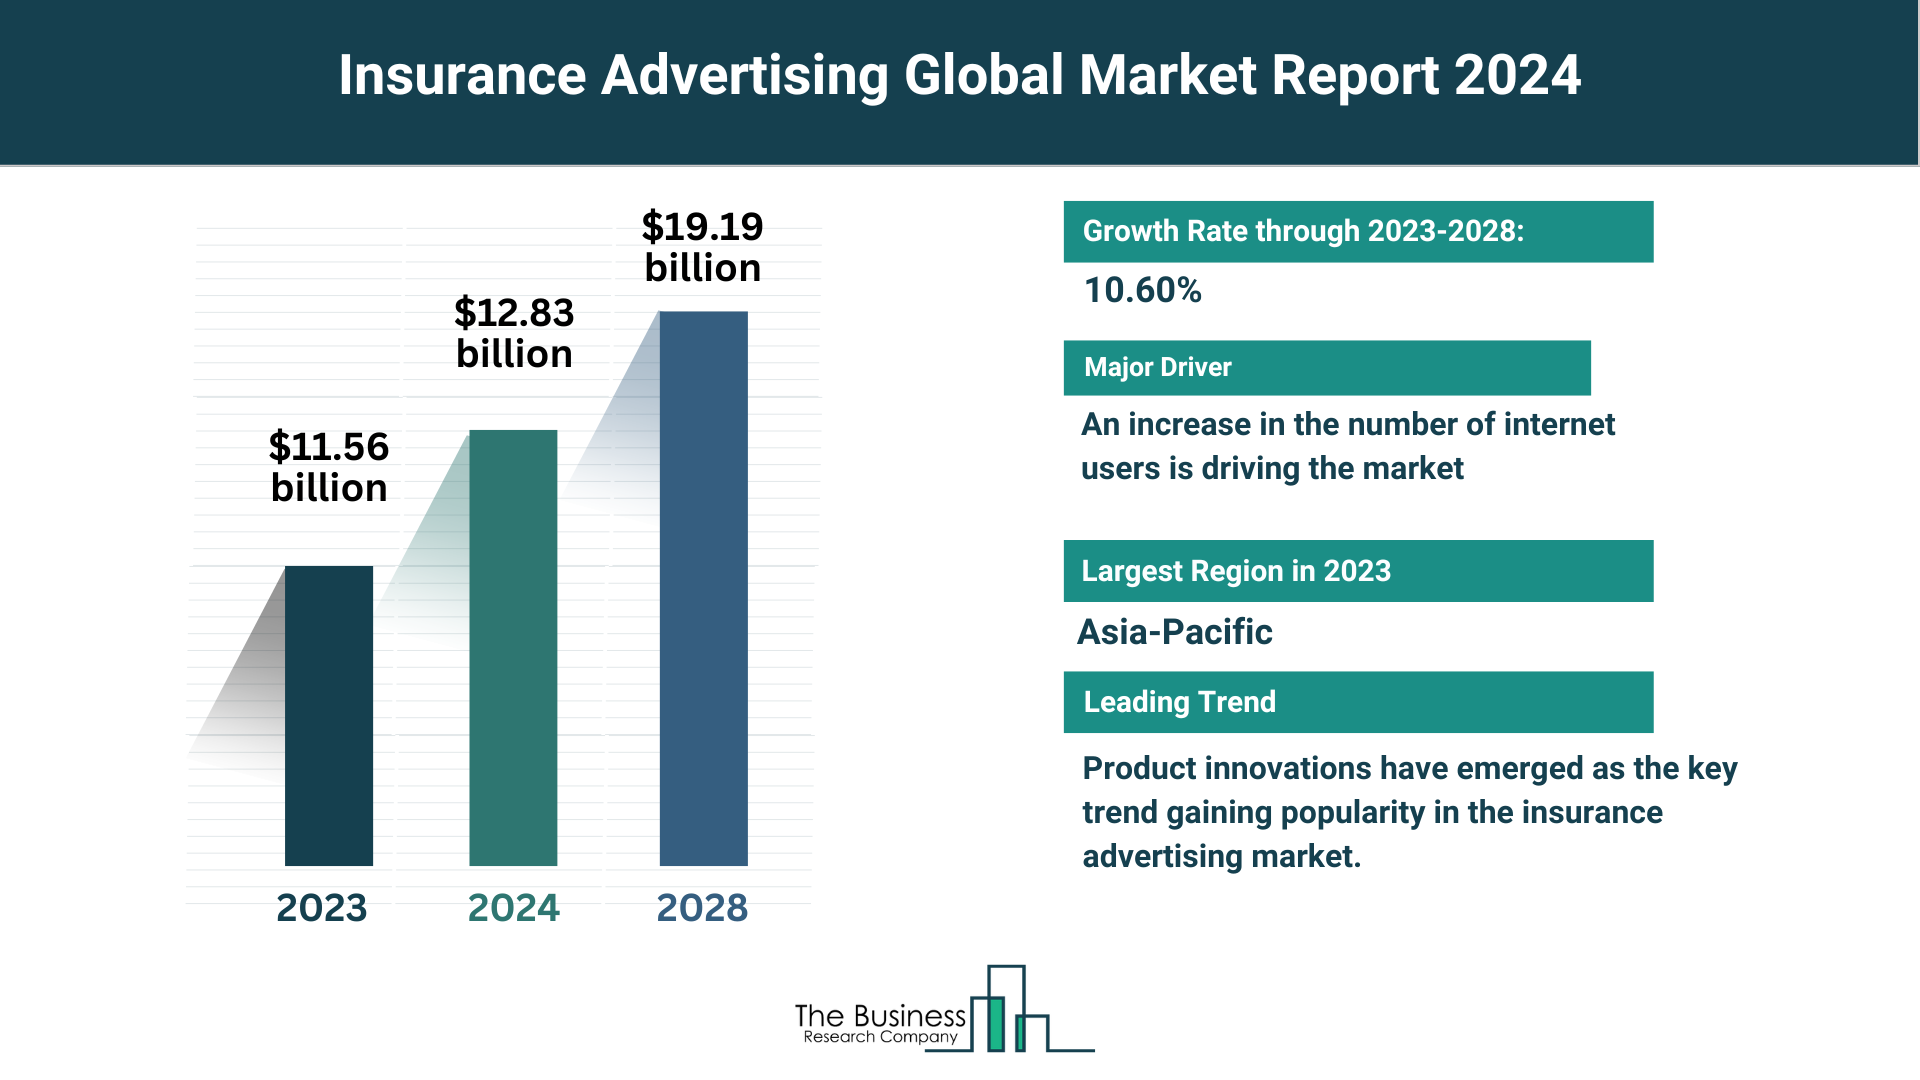 How Is the Insurance Advertising Market Expected To Grow Through 2024-2033?